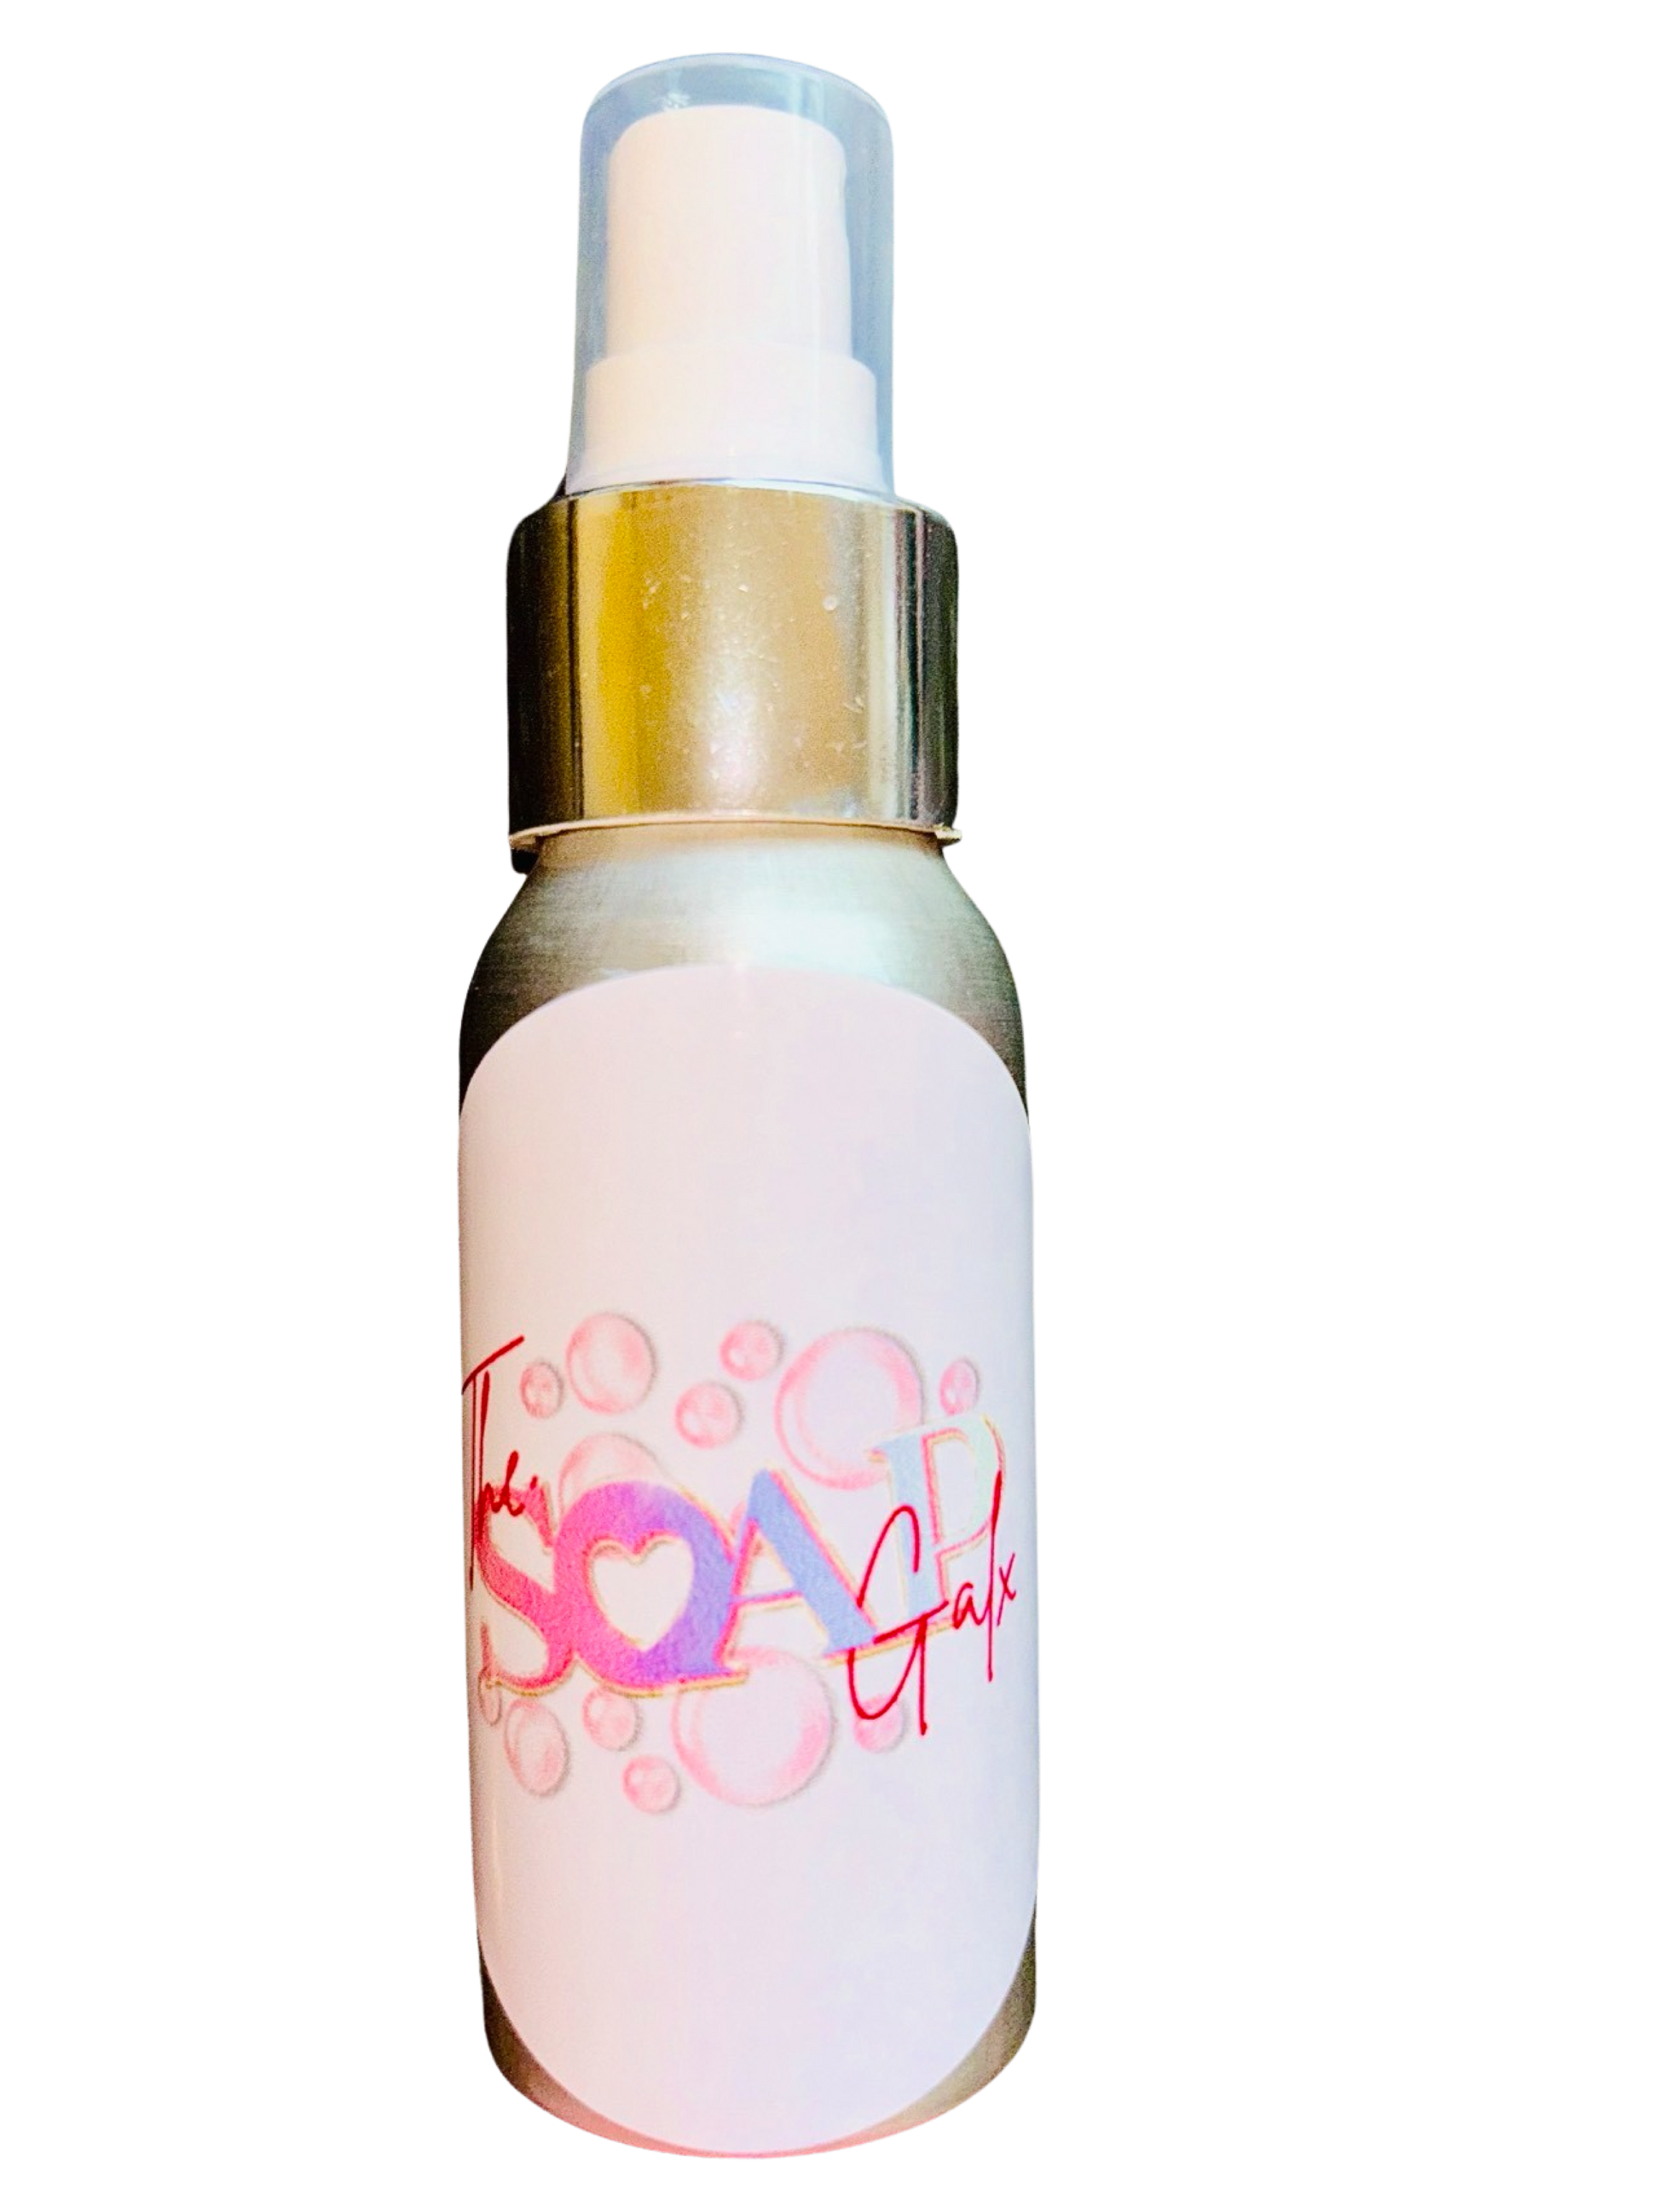 A bottle of The Soap Gal x luxury Body Spray 50ml with a white label that reads "the soap gap" against a black background, featuring a perfume-inspired scent.